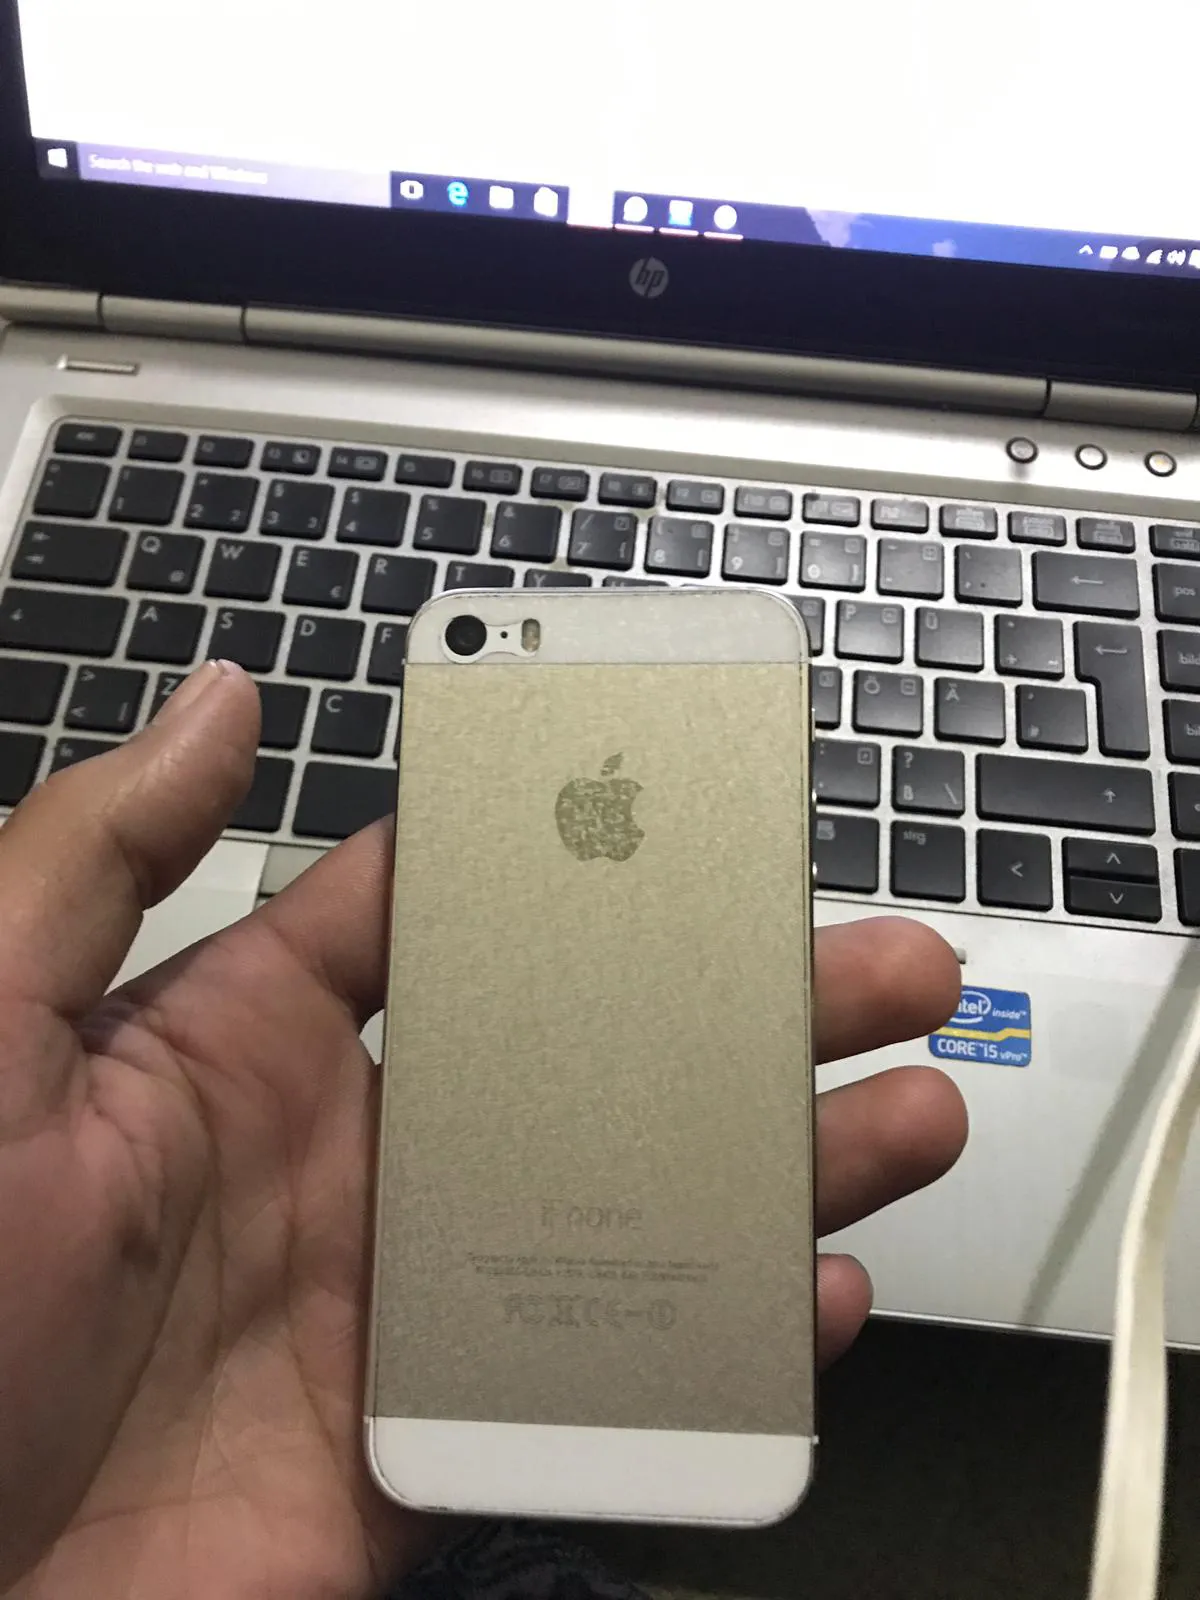 iphone 5s 9/10 condition for sale - photo 2